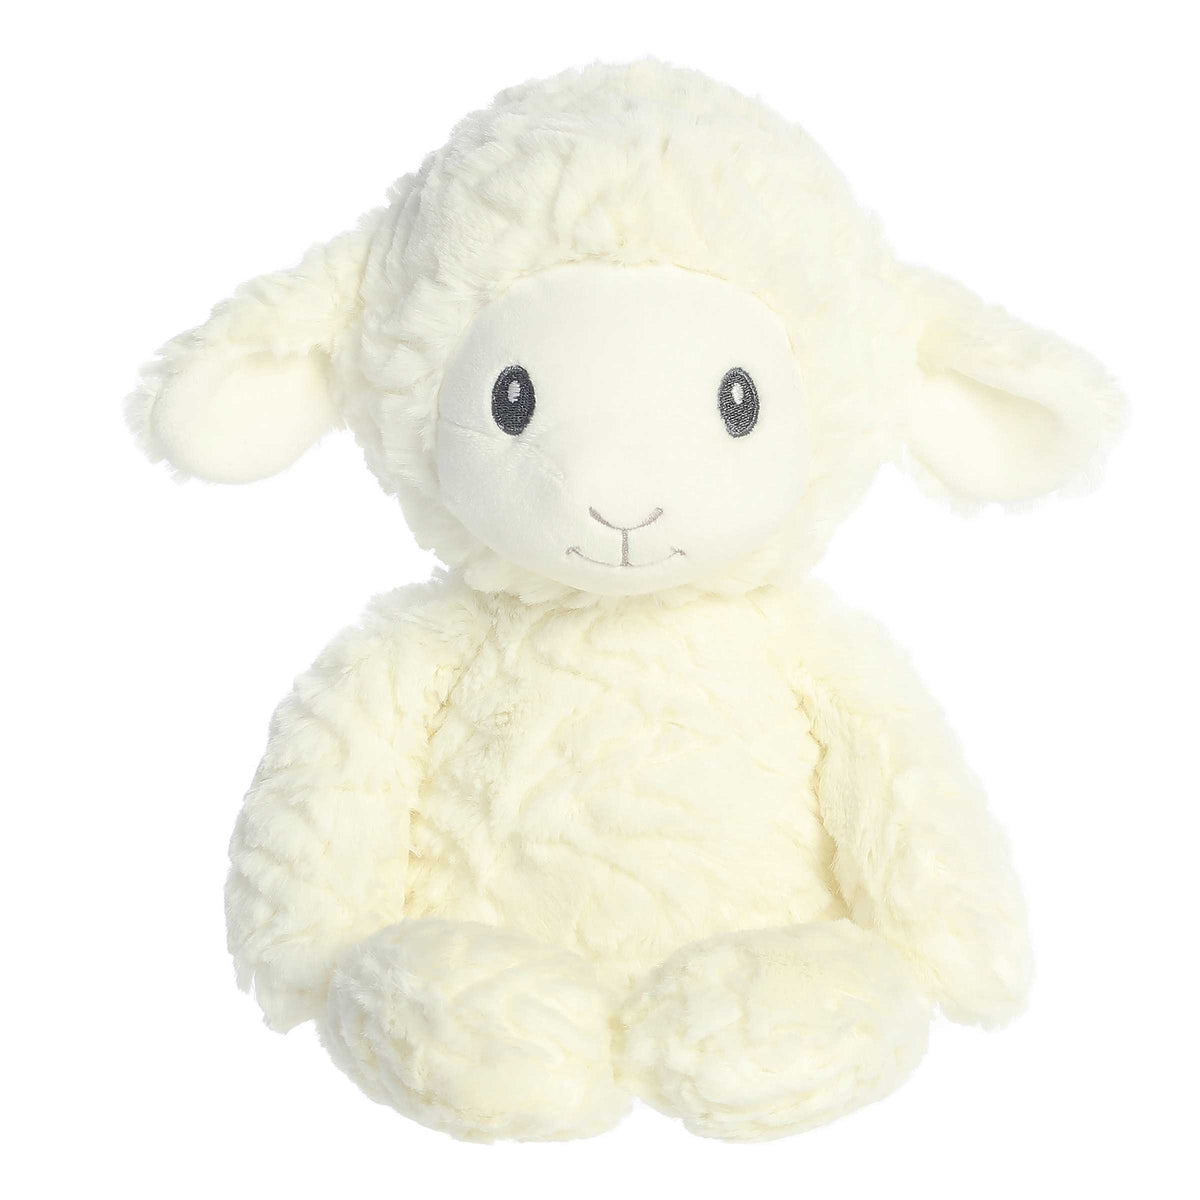 Creamy, cloud-like lamb plush with gentle patterns and soft blue eyes, designed for comfort and security, by Aurora plush.